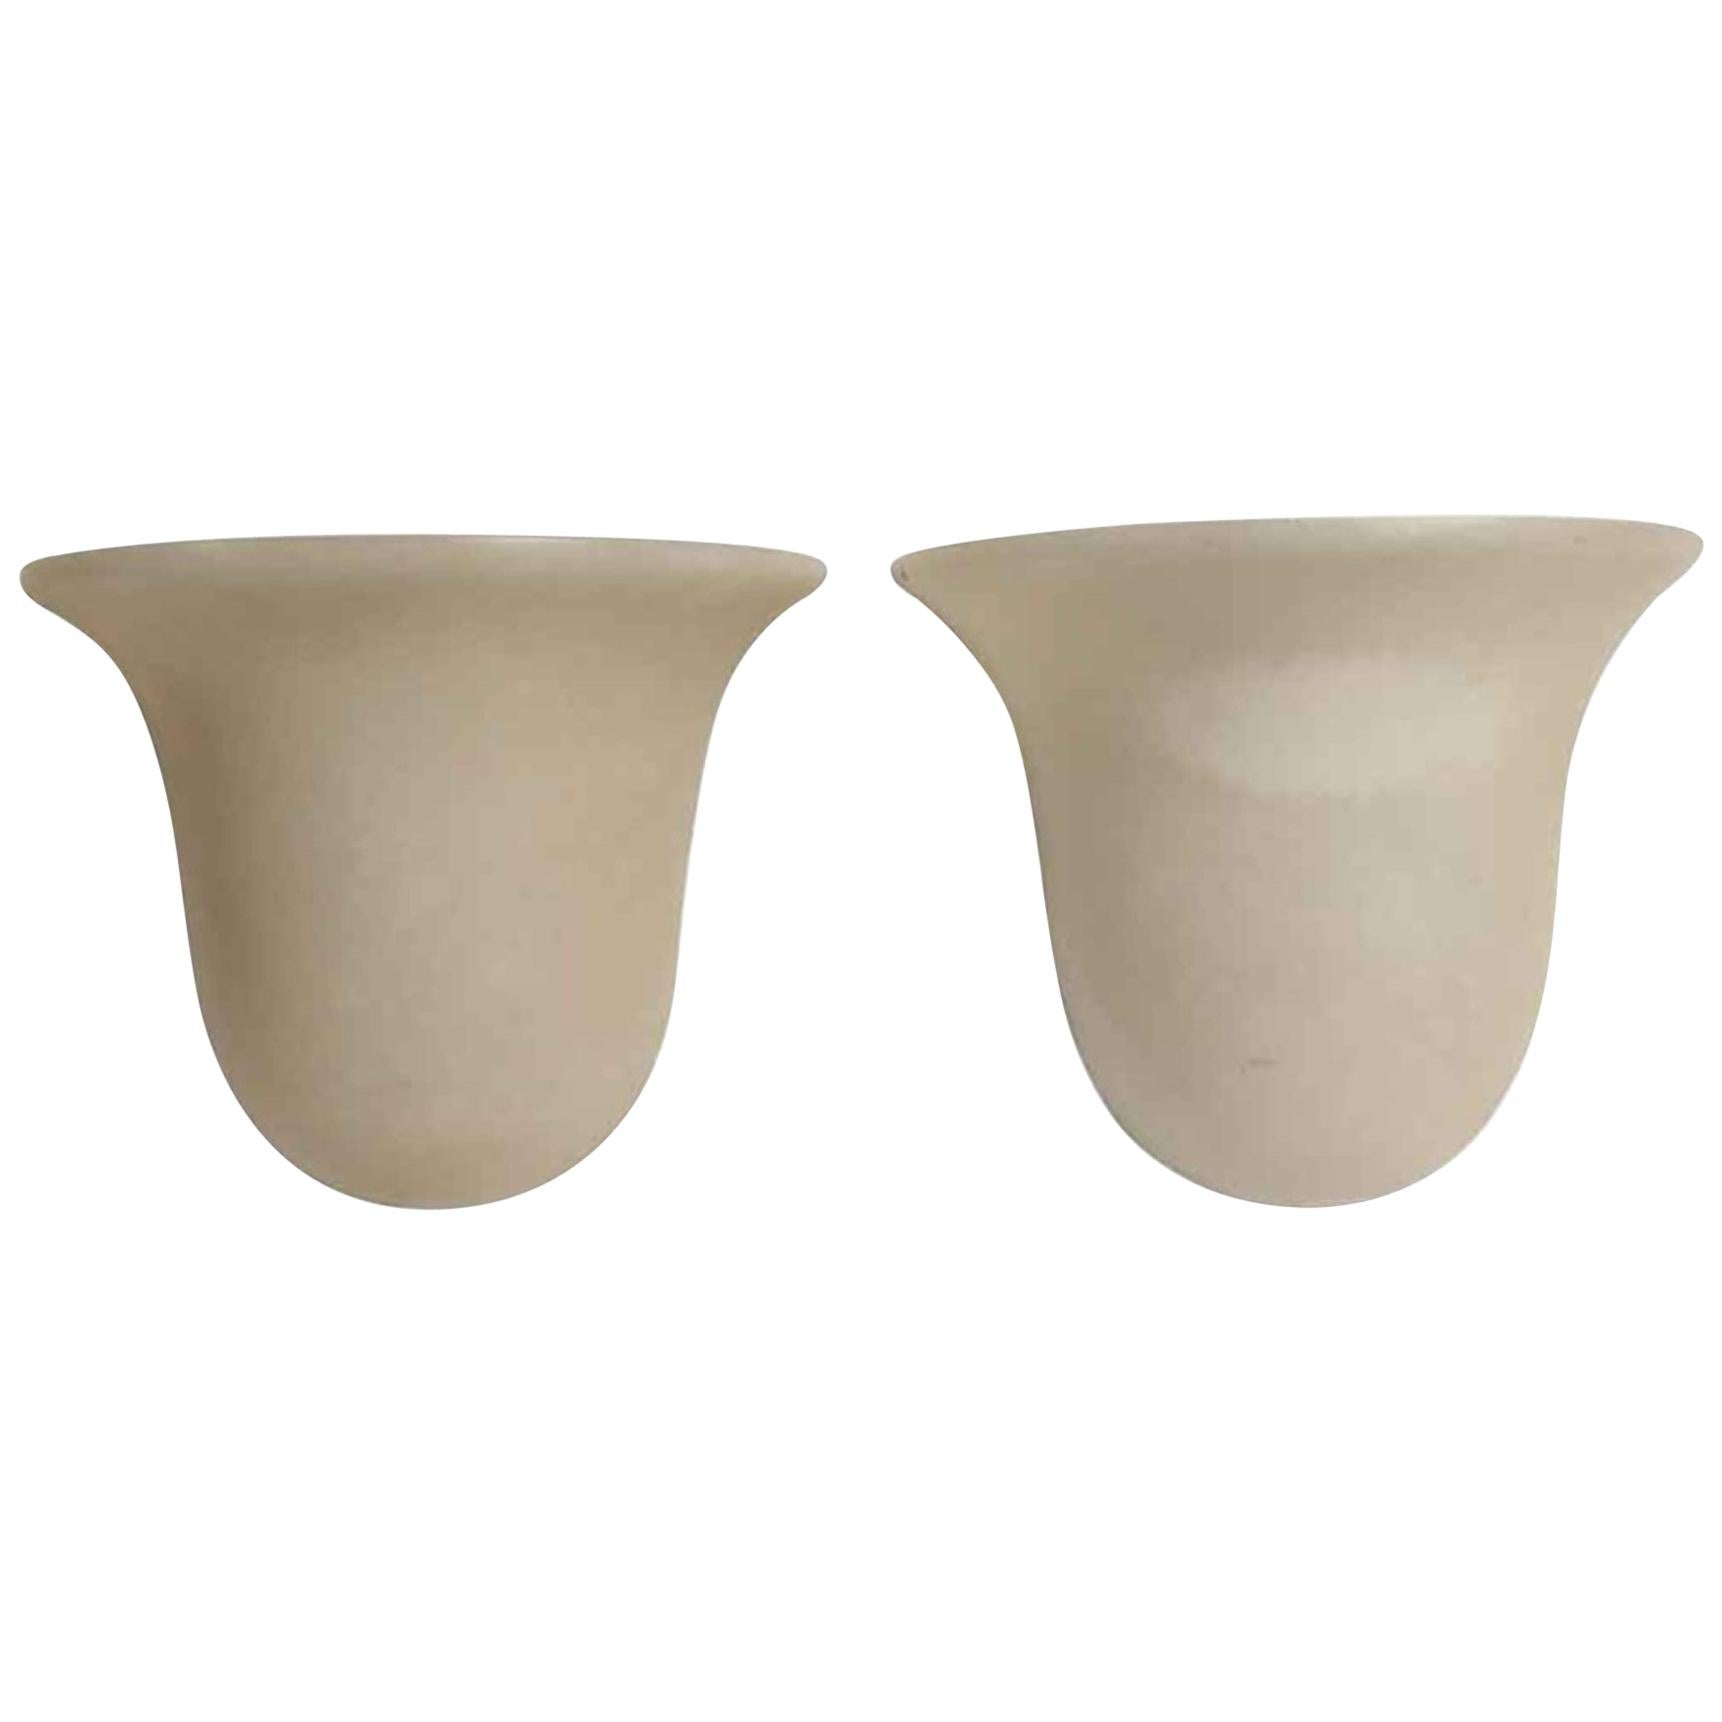 2000s Pair of Modern Alabaster Beige and Tan Wall Sconces For Sale